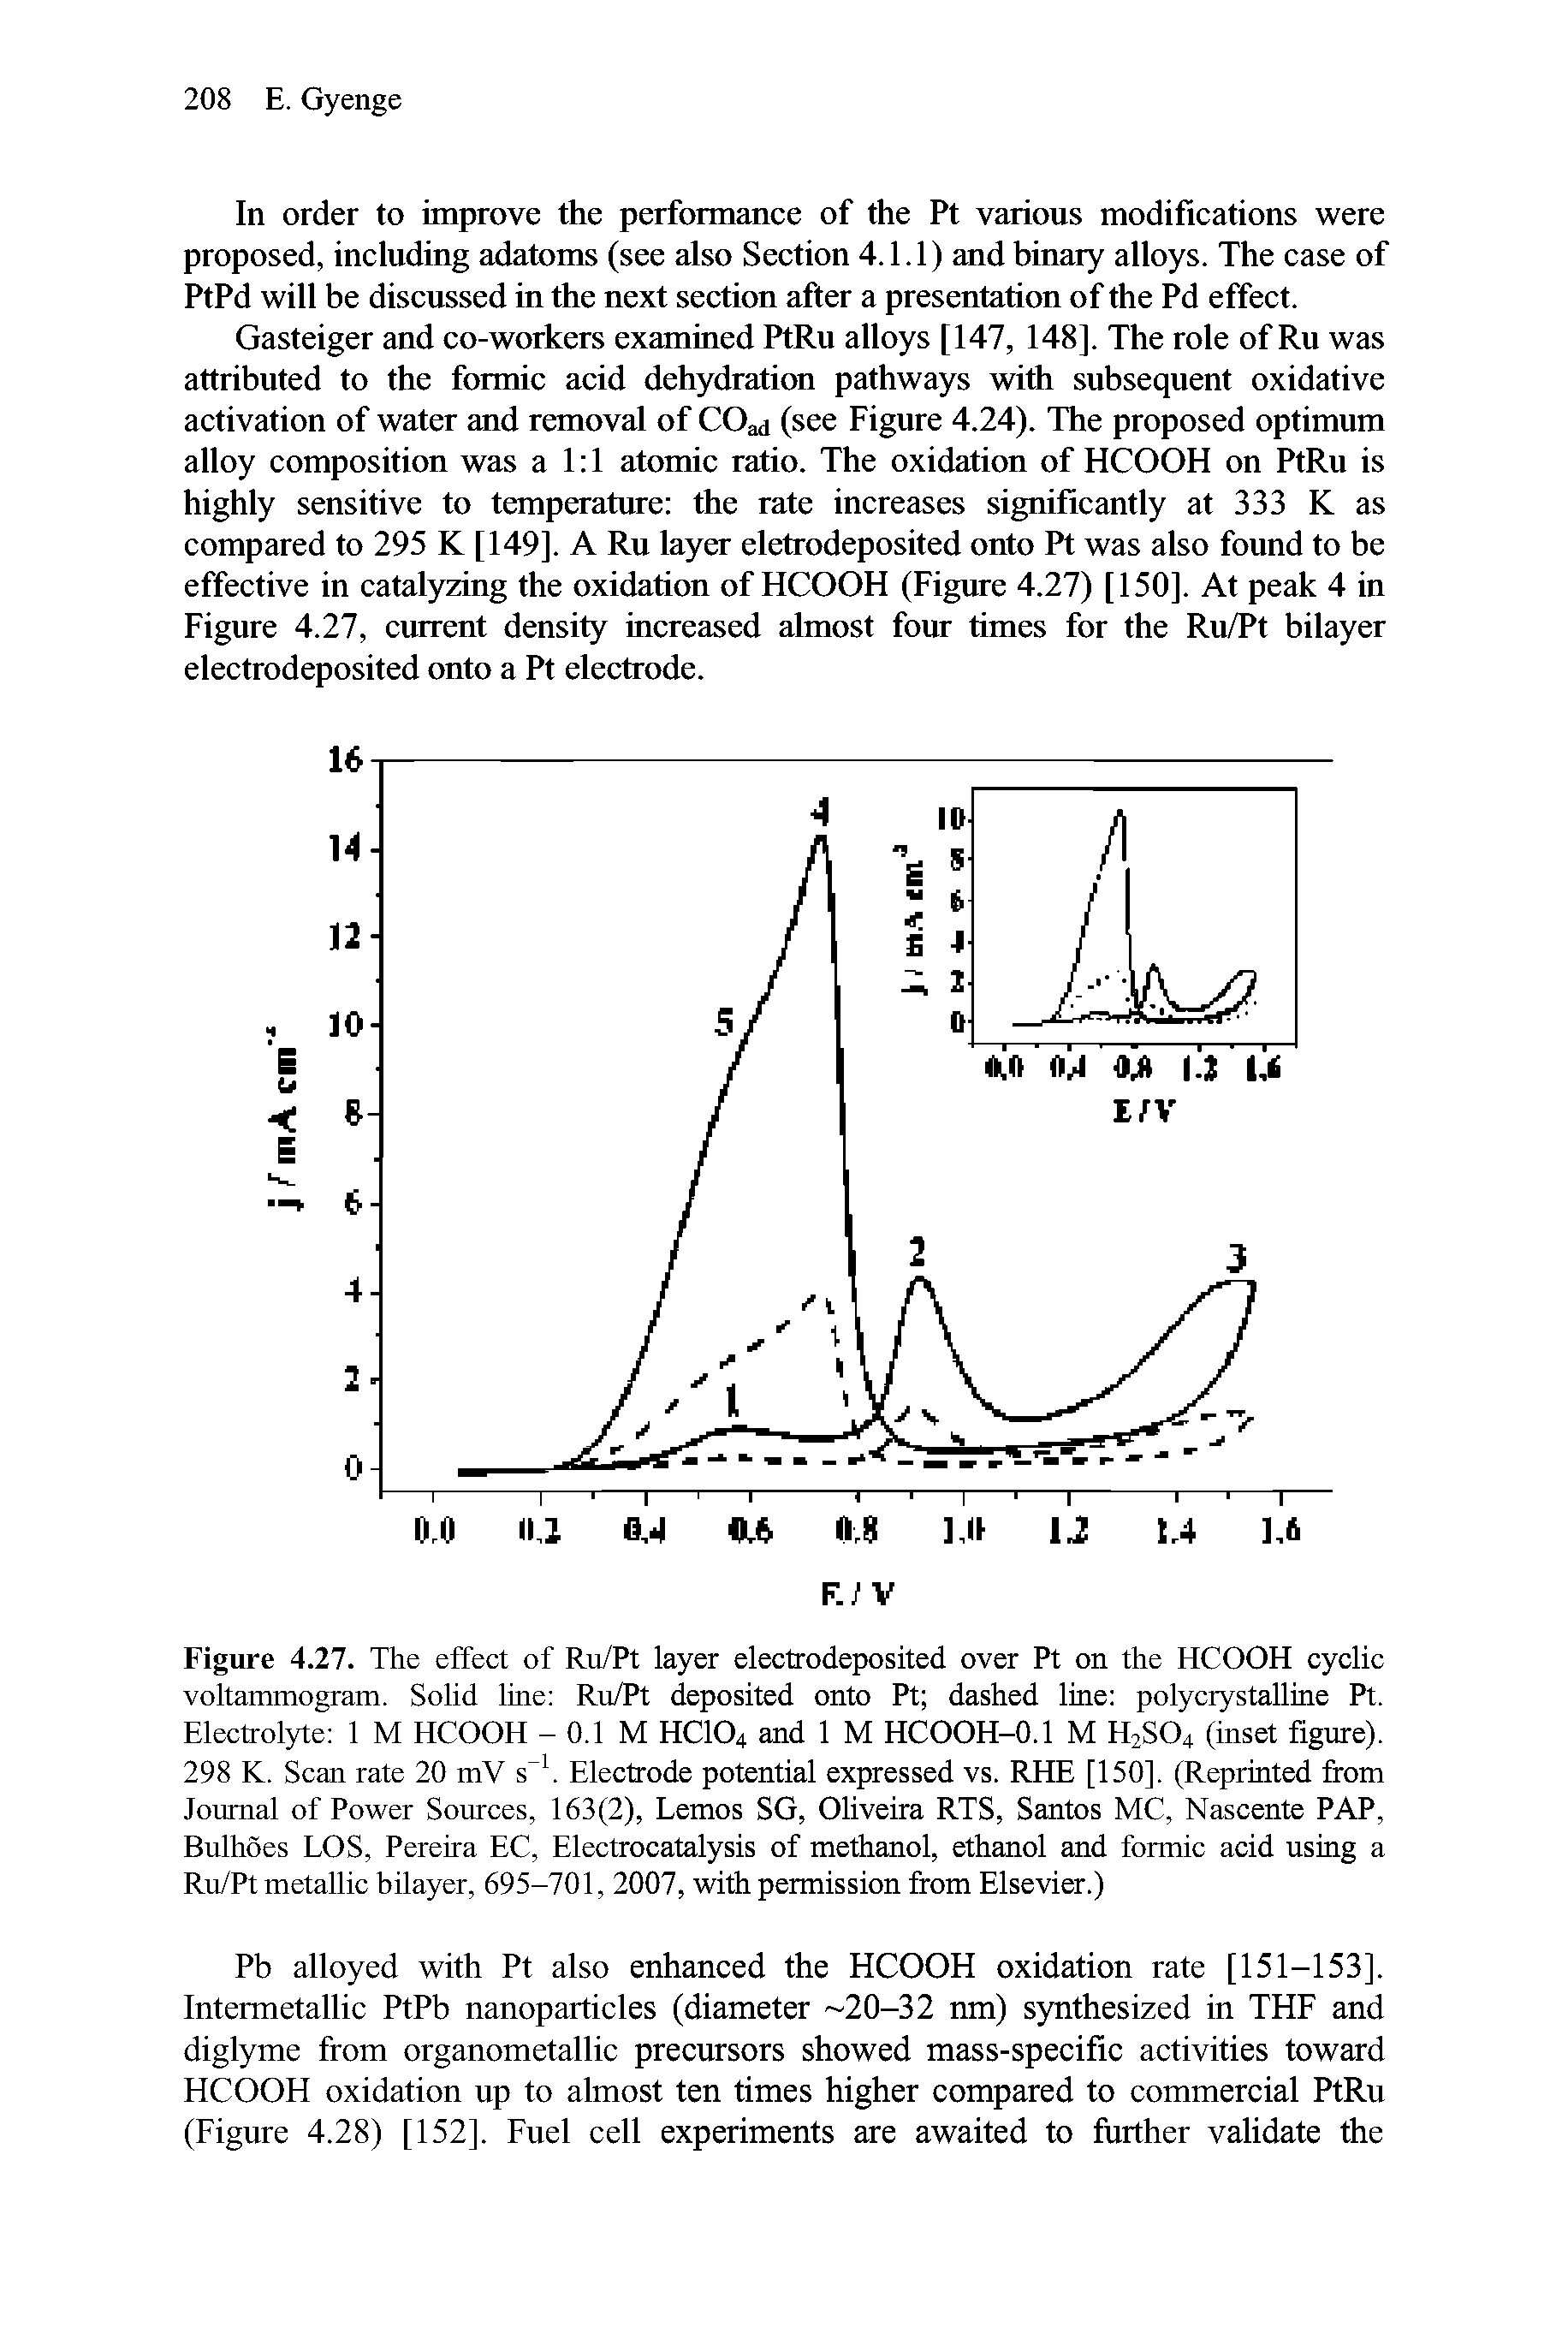 Figure 4.27. The effect of Ru/Pt layer electrodeposited over Pt on the HCOOH cyclic voltammogram. Solid line Ru/Pt deposited onto Pt dashed line polycrystalline Pt. Electrolyte 1 M HCOOH - 0.1 M HCIO4 and 1 M HCOOH-0.1 M H2SO4 (inset figure). 298 K. Scan rate 20 mV s Electrode potential expressed vs. RHE [150], (Reprinted from Journal of Power Sources, 163(2), Lemos SG, Oliveira RTS, Santos MC, Nascente PAP, Bulhoes LOS, Pereira EC, Electrocatalysis of methanol, ethanol and formic acid using a Ru/Pt metallic bilayer, 695-701, 2007, with permission from Elsevier.)...